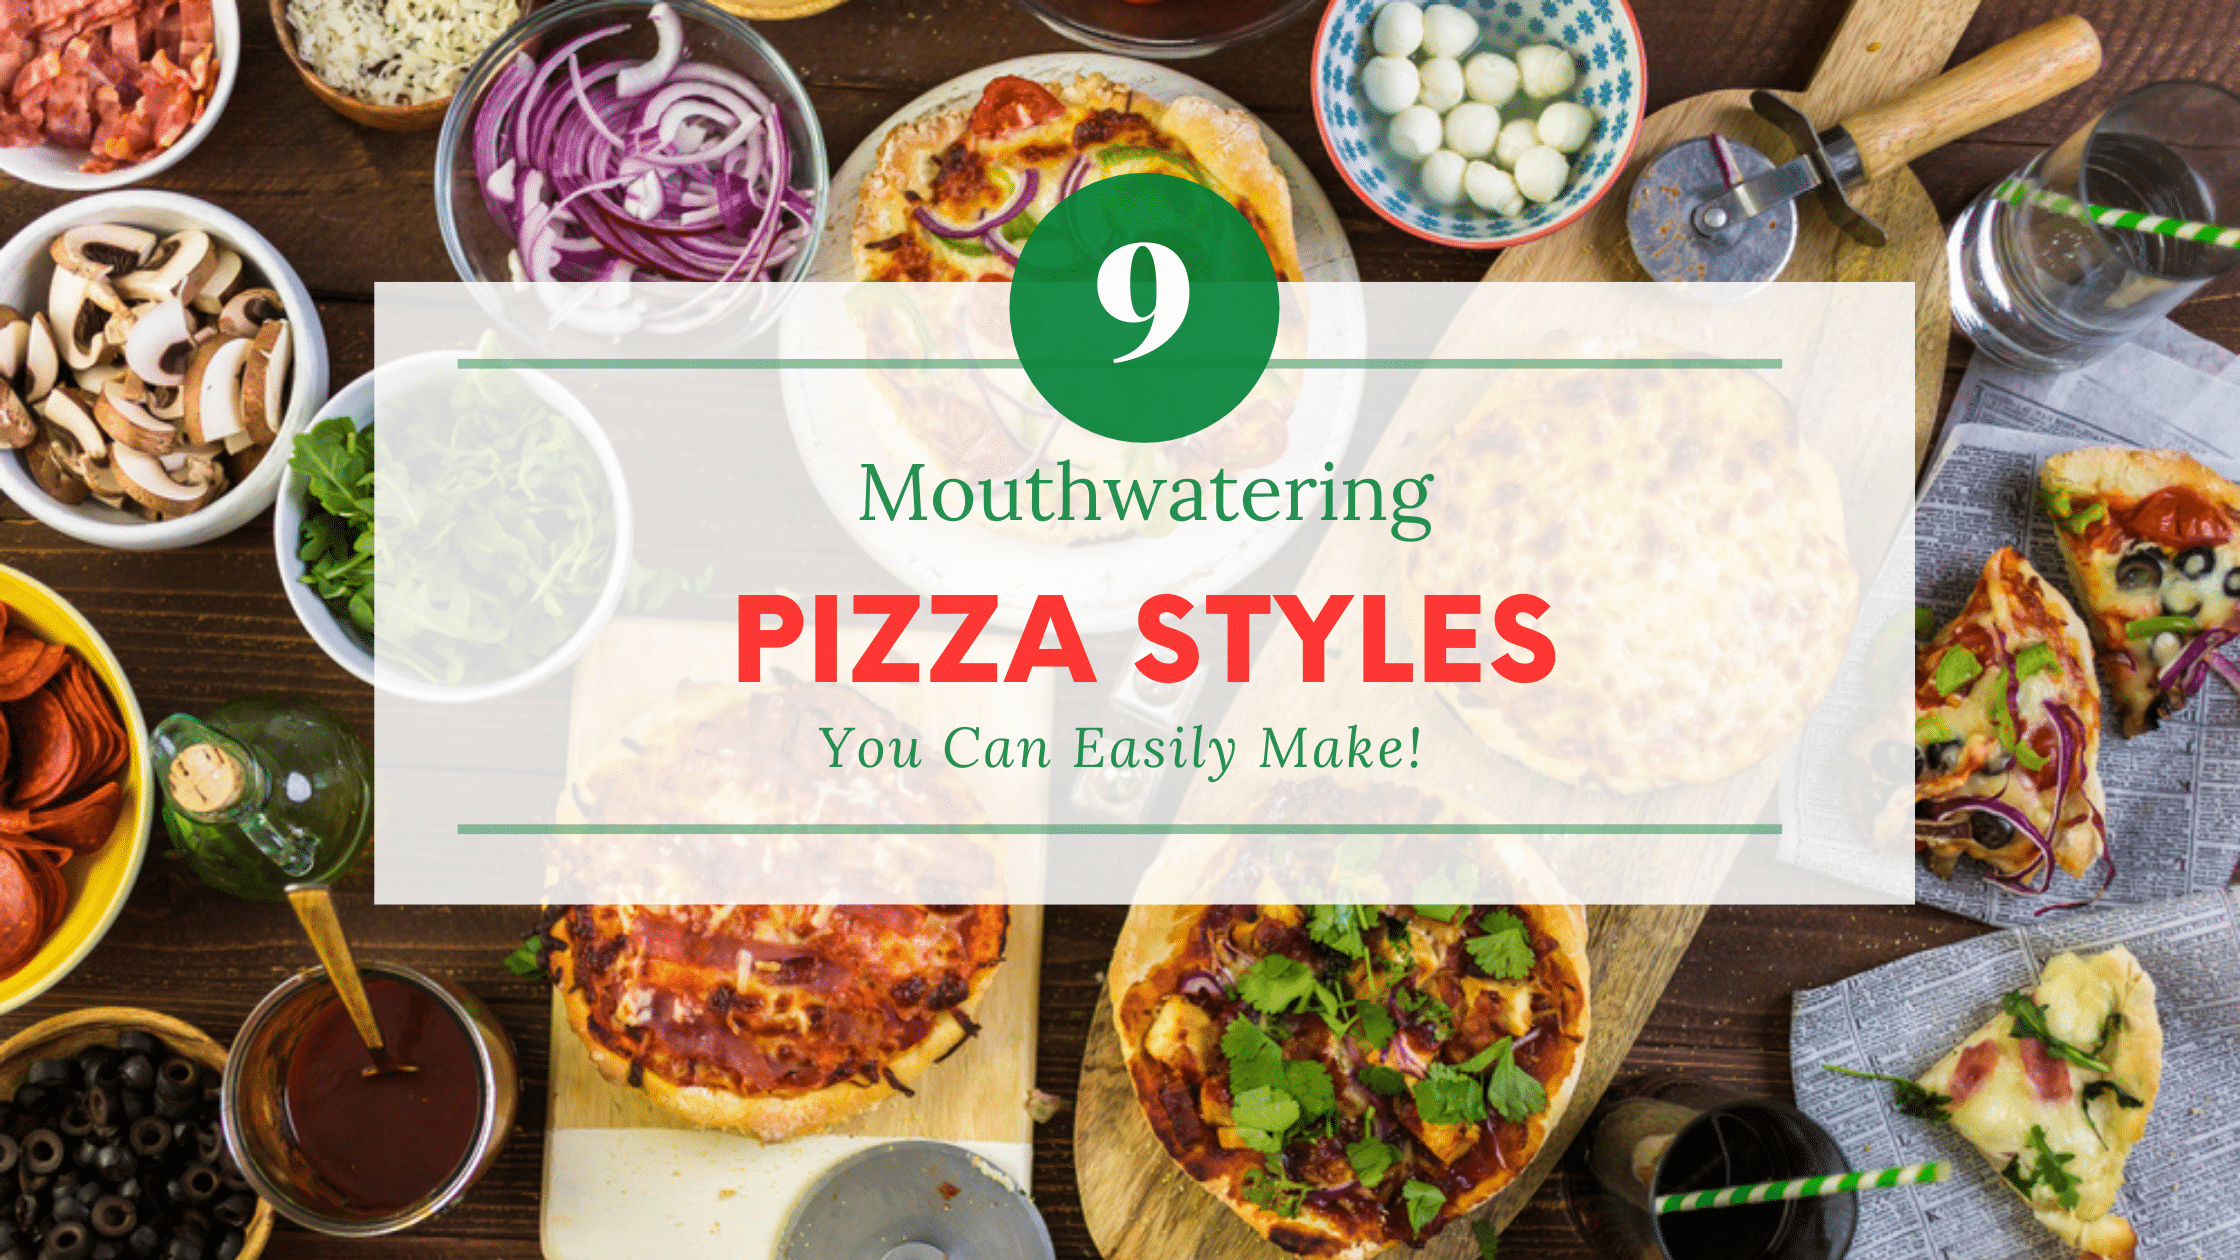 9 Mouthwatering Pizza Styles You Can Easily Make at Home